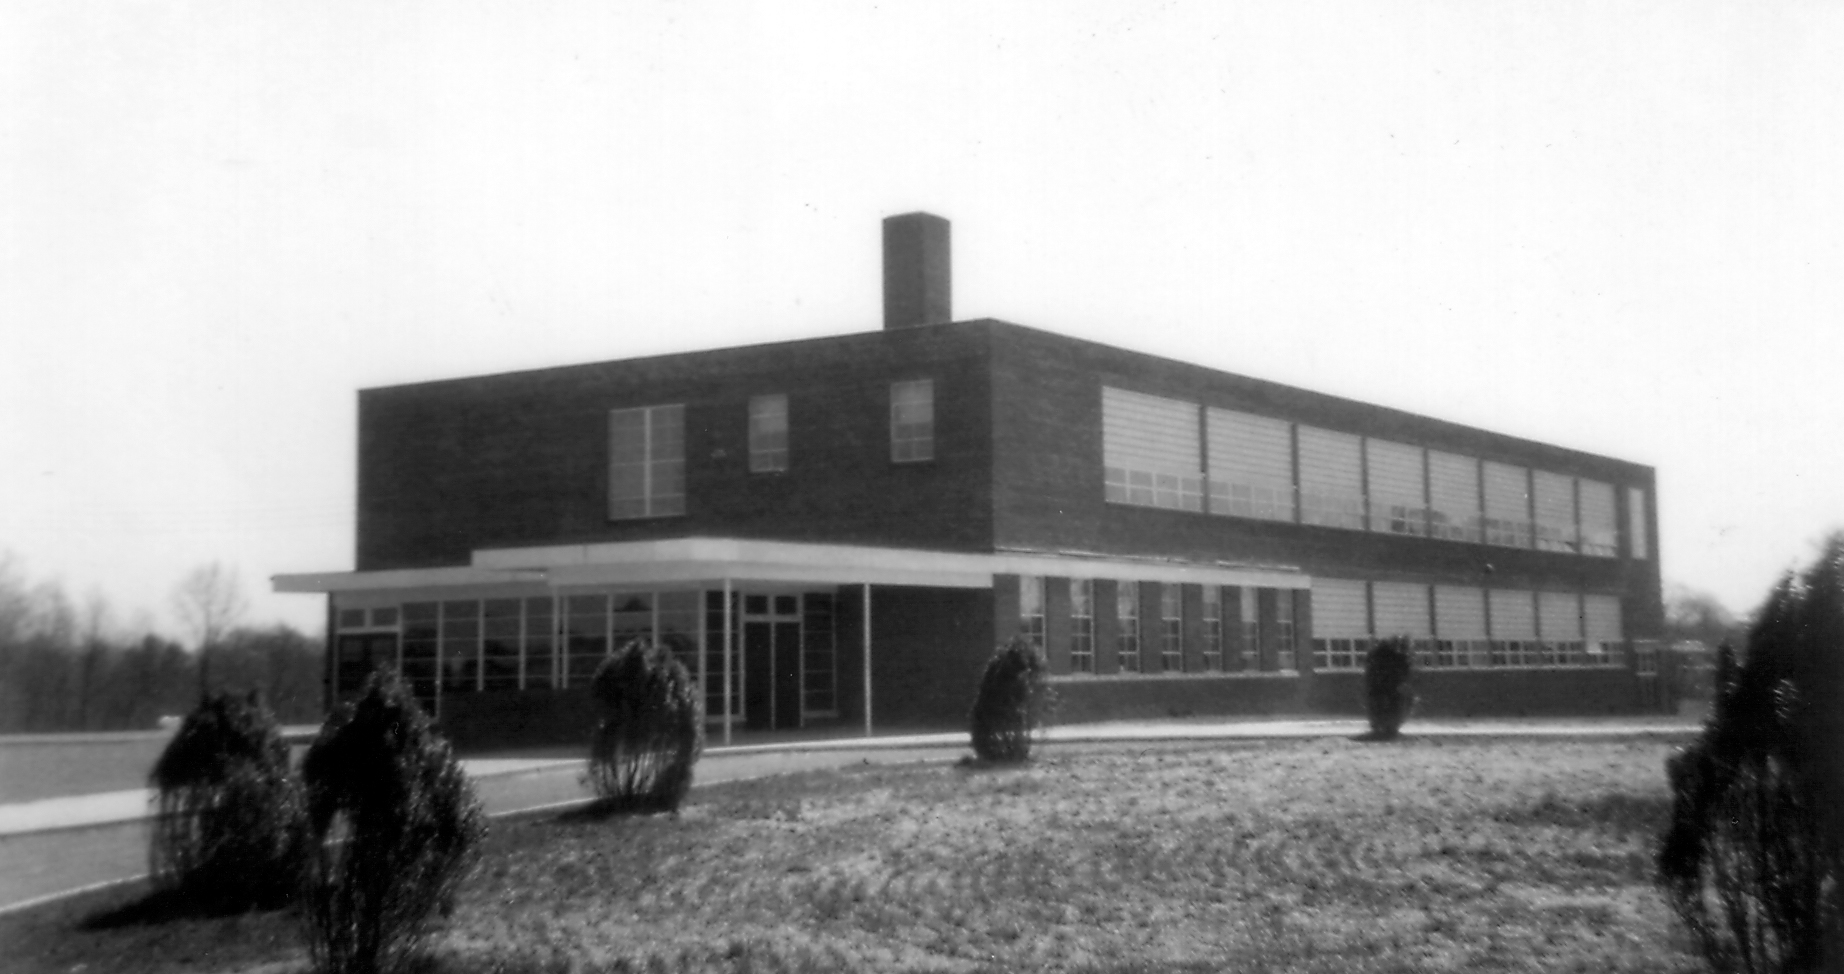 Black and white photograph of the front exterior of the new Forestville Elementary School taken in 1954. The building is a two-story brick structure with classrooms on both sides of the building separated by central hallways. The main office is located on the first floor near the main entrance. The main entrance, a set of double doors surrounded by windows, is covered by a metal awning. A circular driveway curves in front of the building. In the center of the circle is a grassy area where several trees or tall shrubs have been planted. 